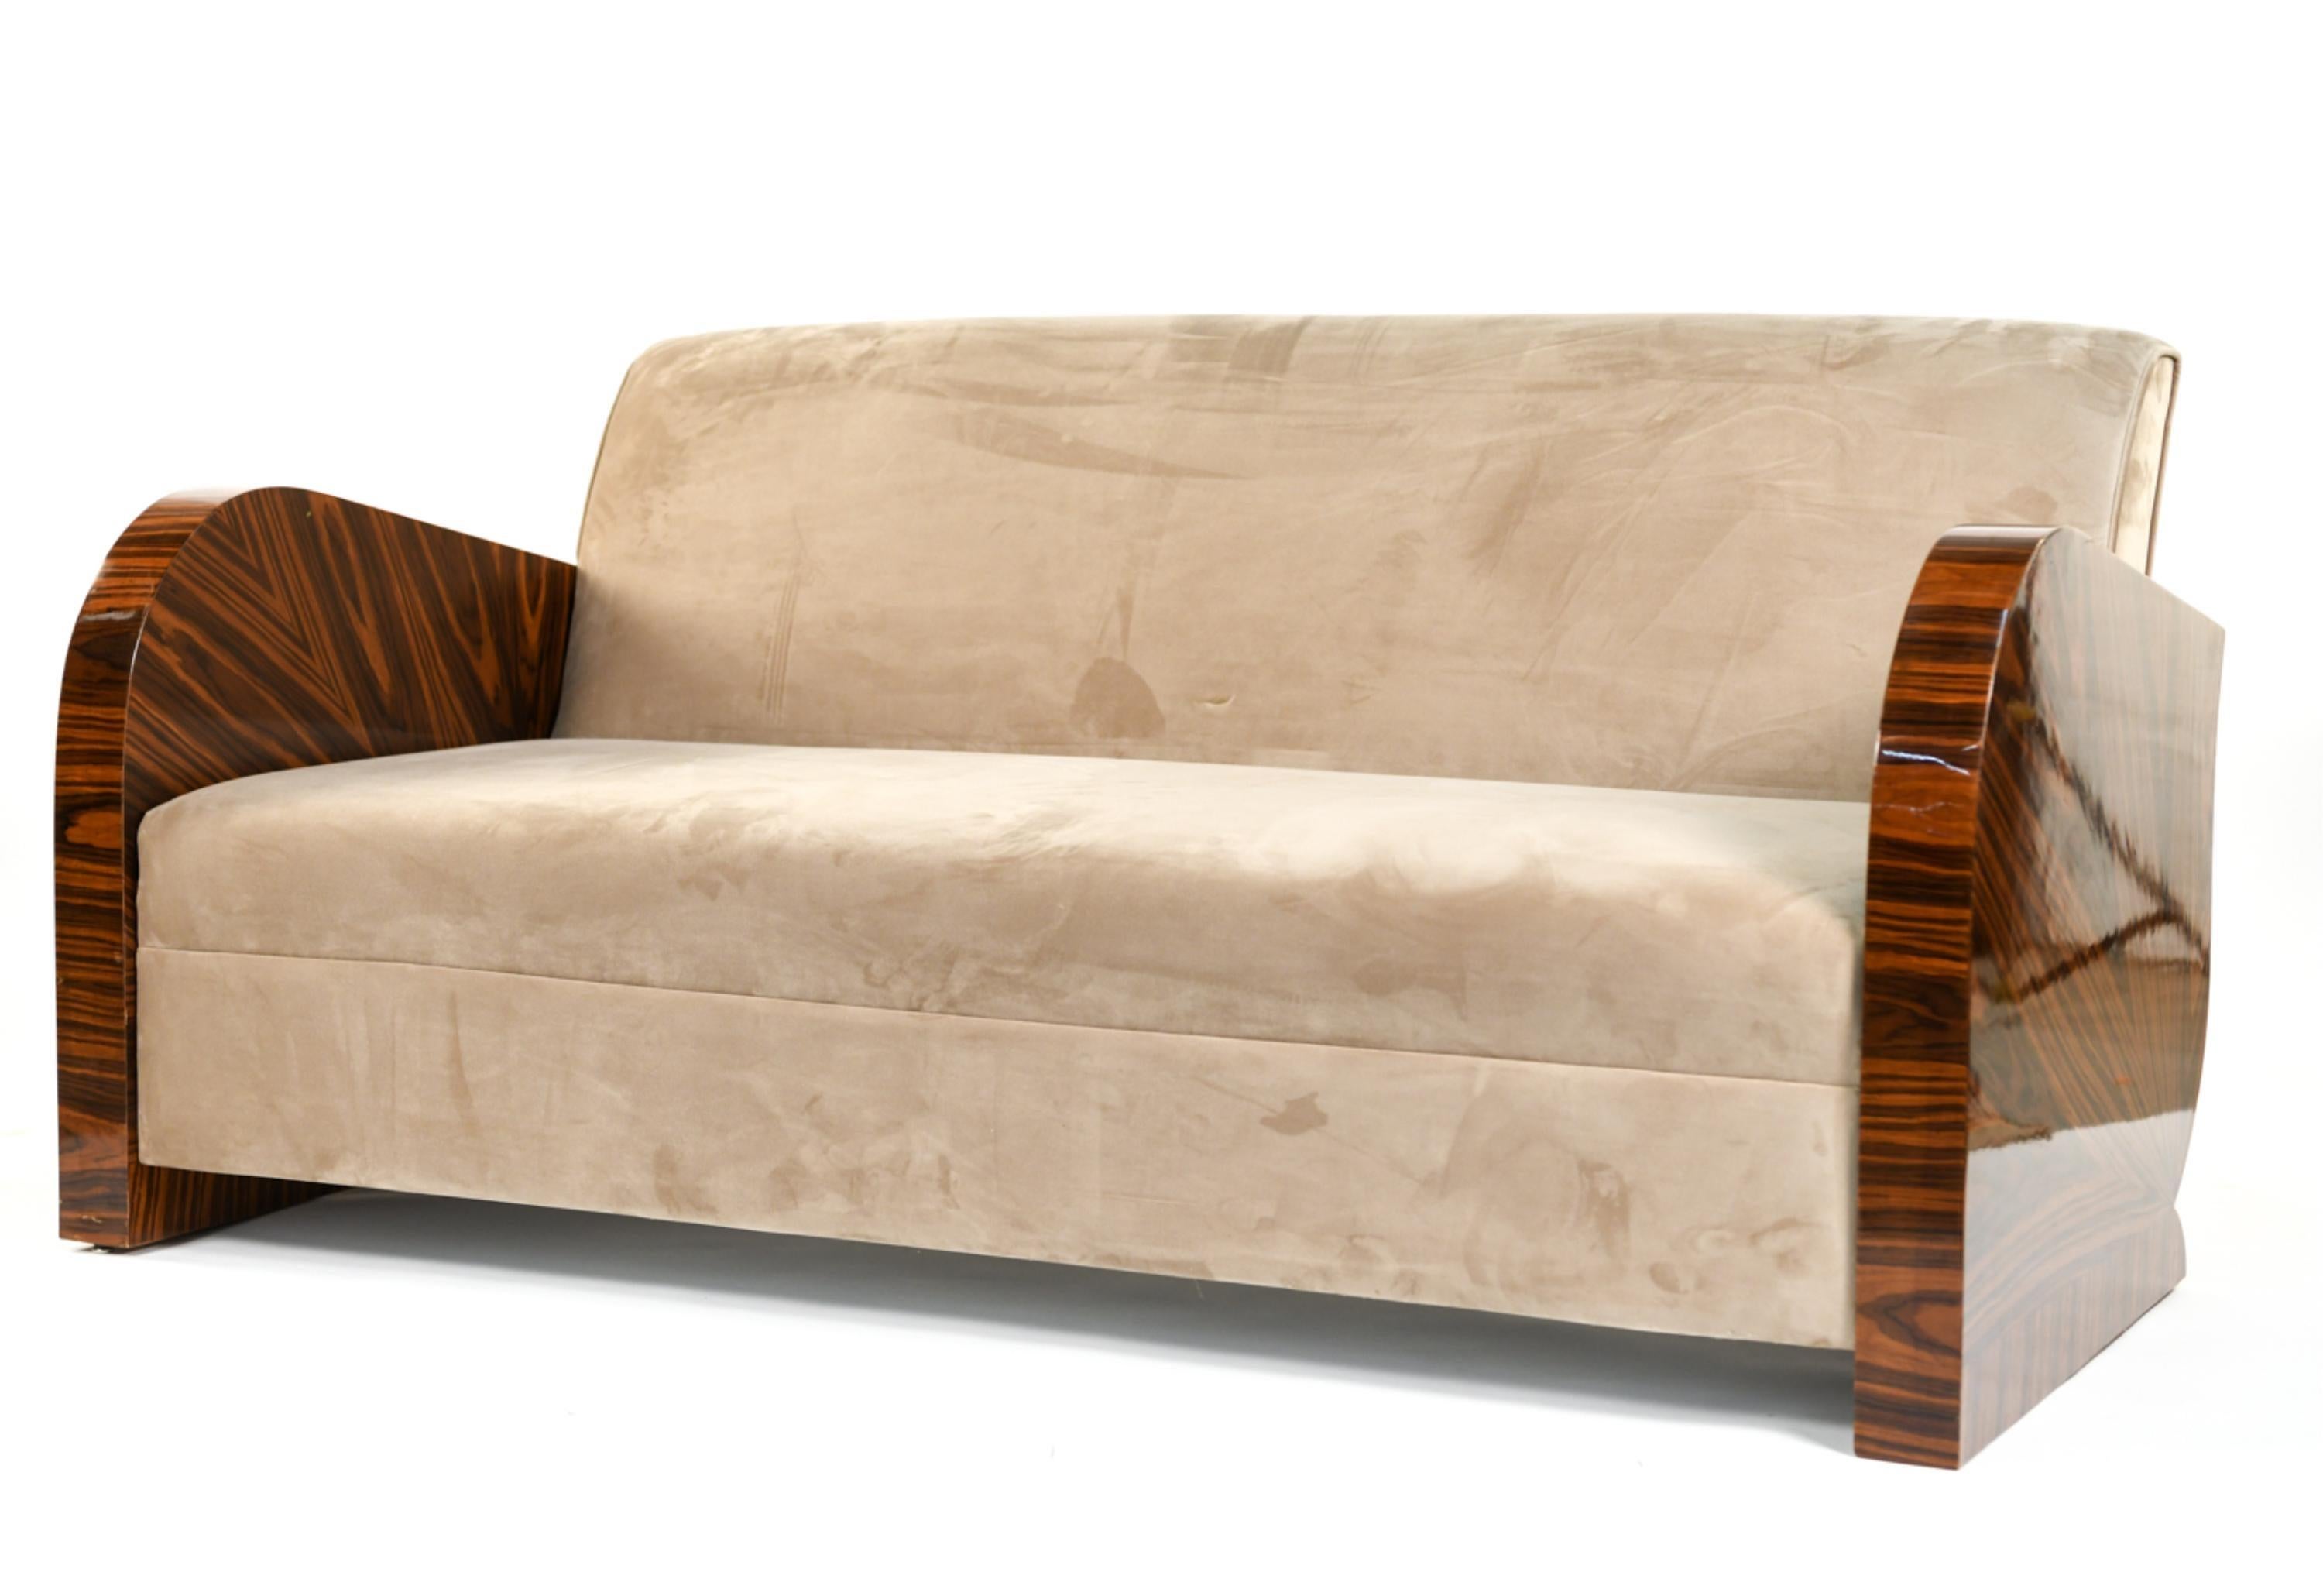 20th Century French Design, Art Deco, Sofa, Lacquered Rosewood, Beige Velour, France, 1930s For Sale